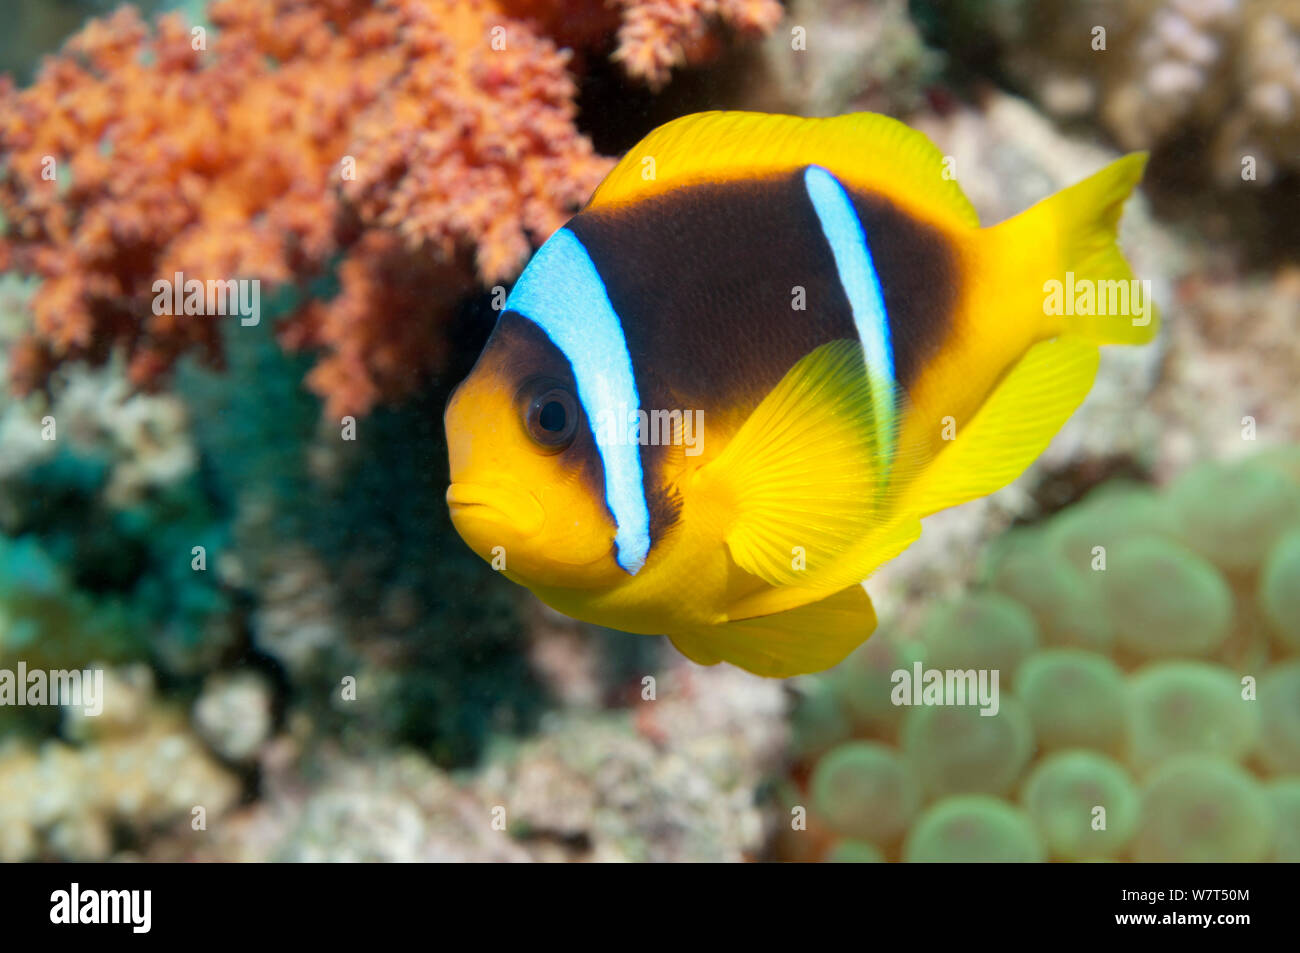 Red Sea anemonefish (Amphiprion bicinctus) in anemone. Egypt, Red Sea. Stock Photo